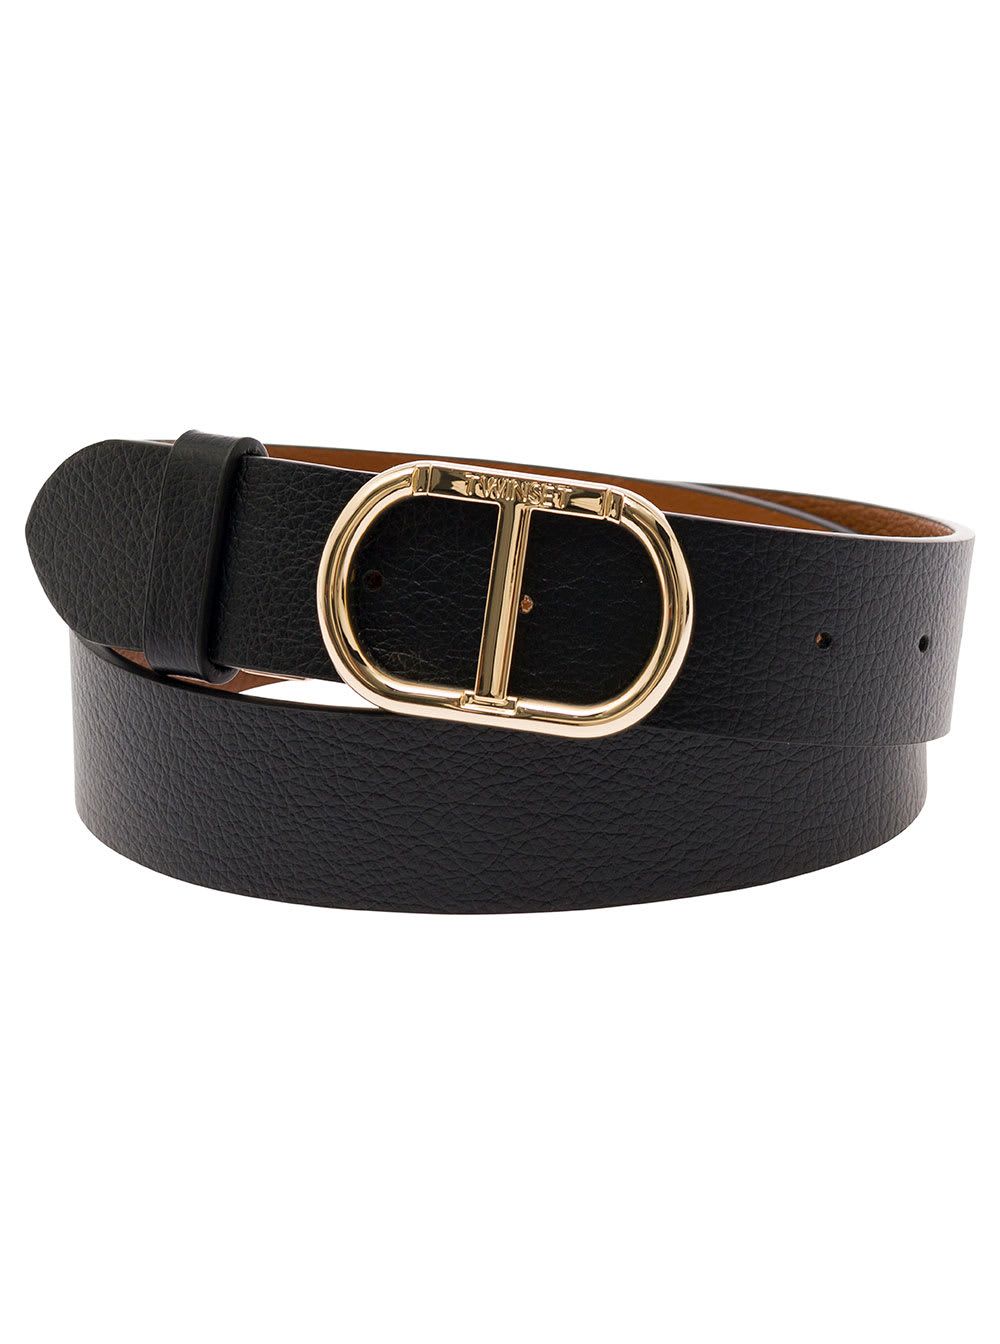 Black And Brown Reversible Belt With Oval T Buckle In Vegan Leather Woman TwinSet